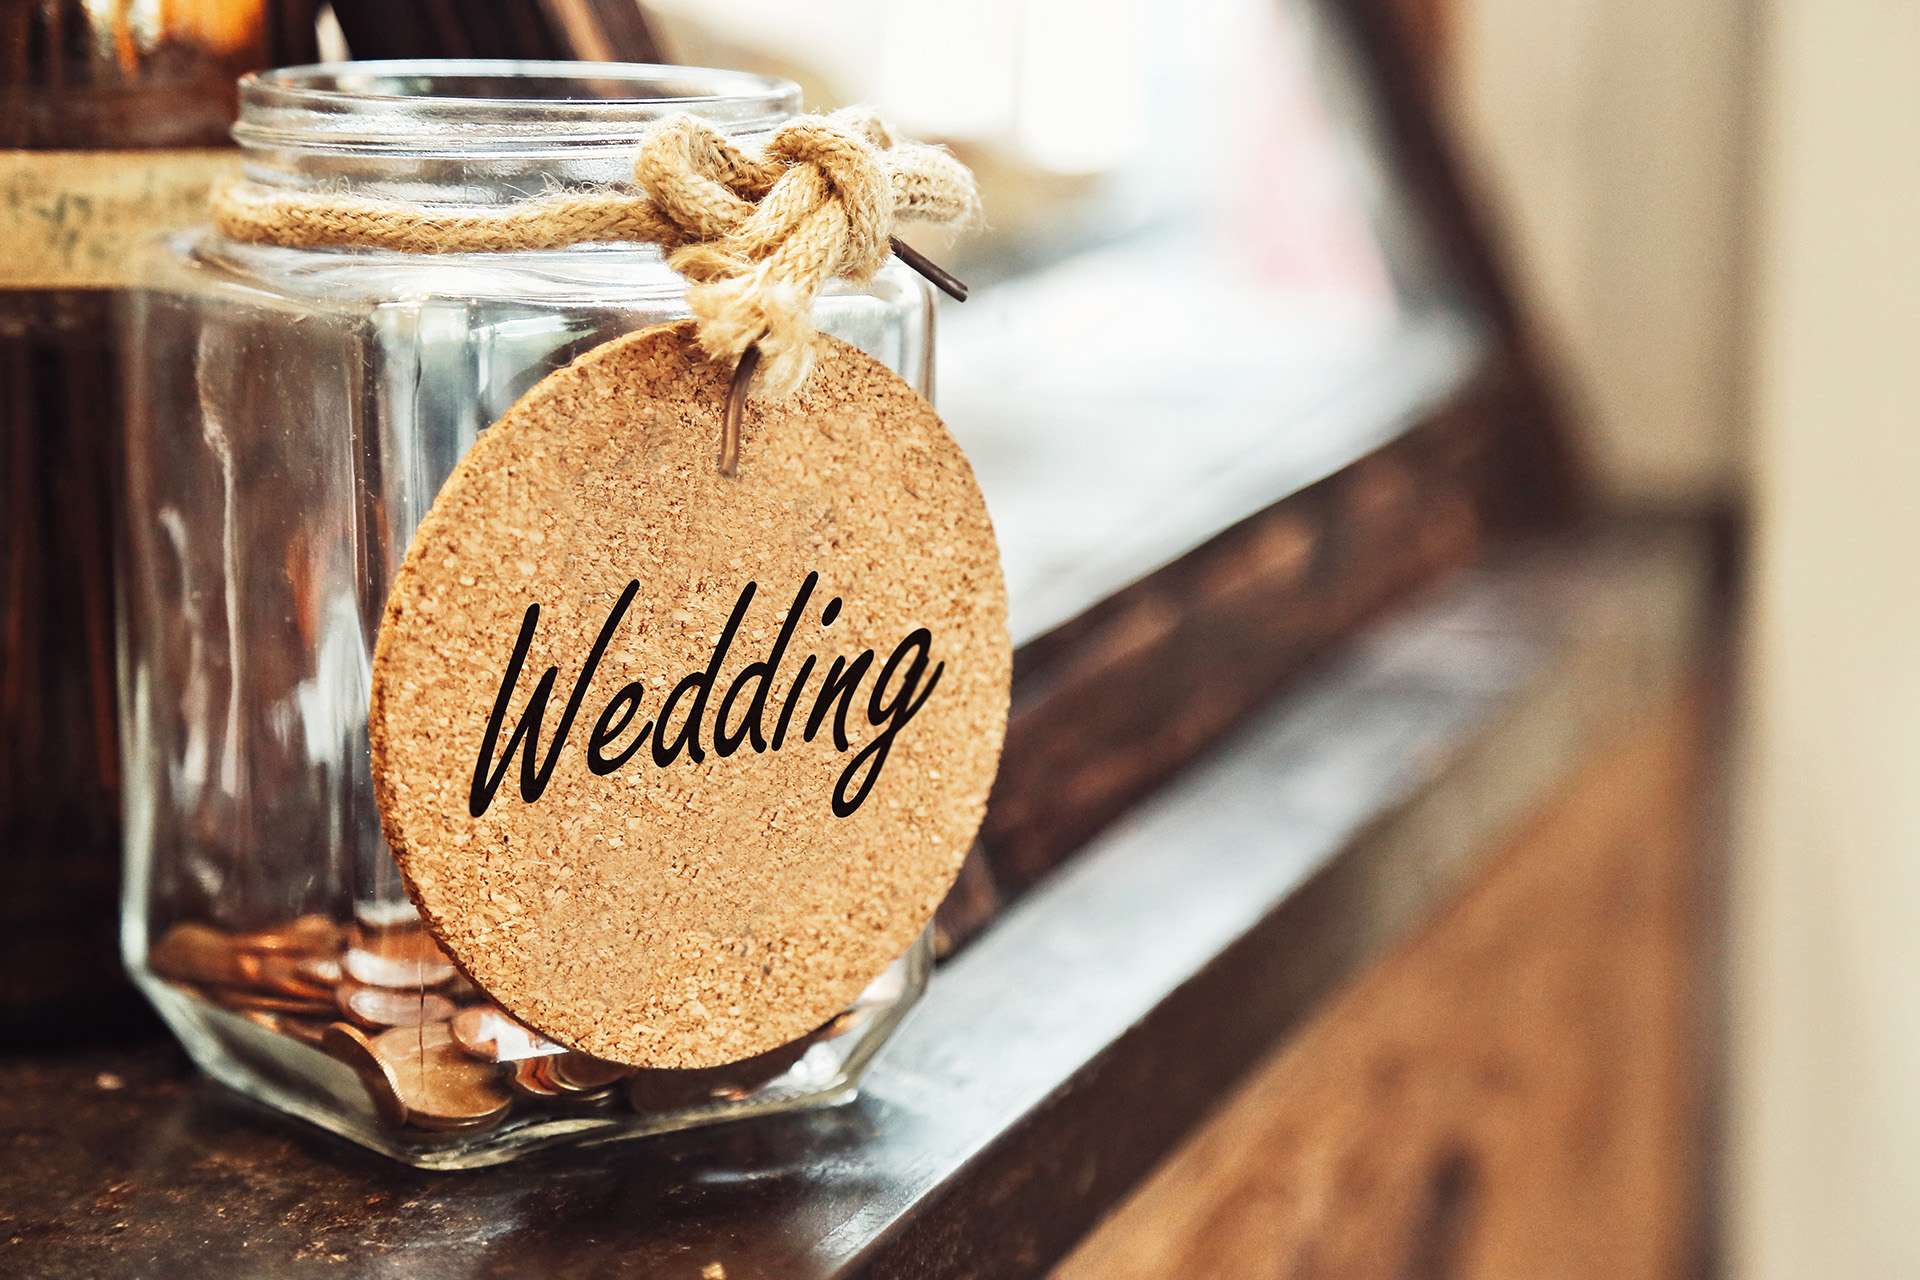 Image of a wedding savings jar filled with coins